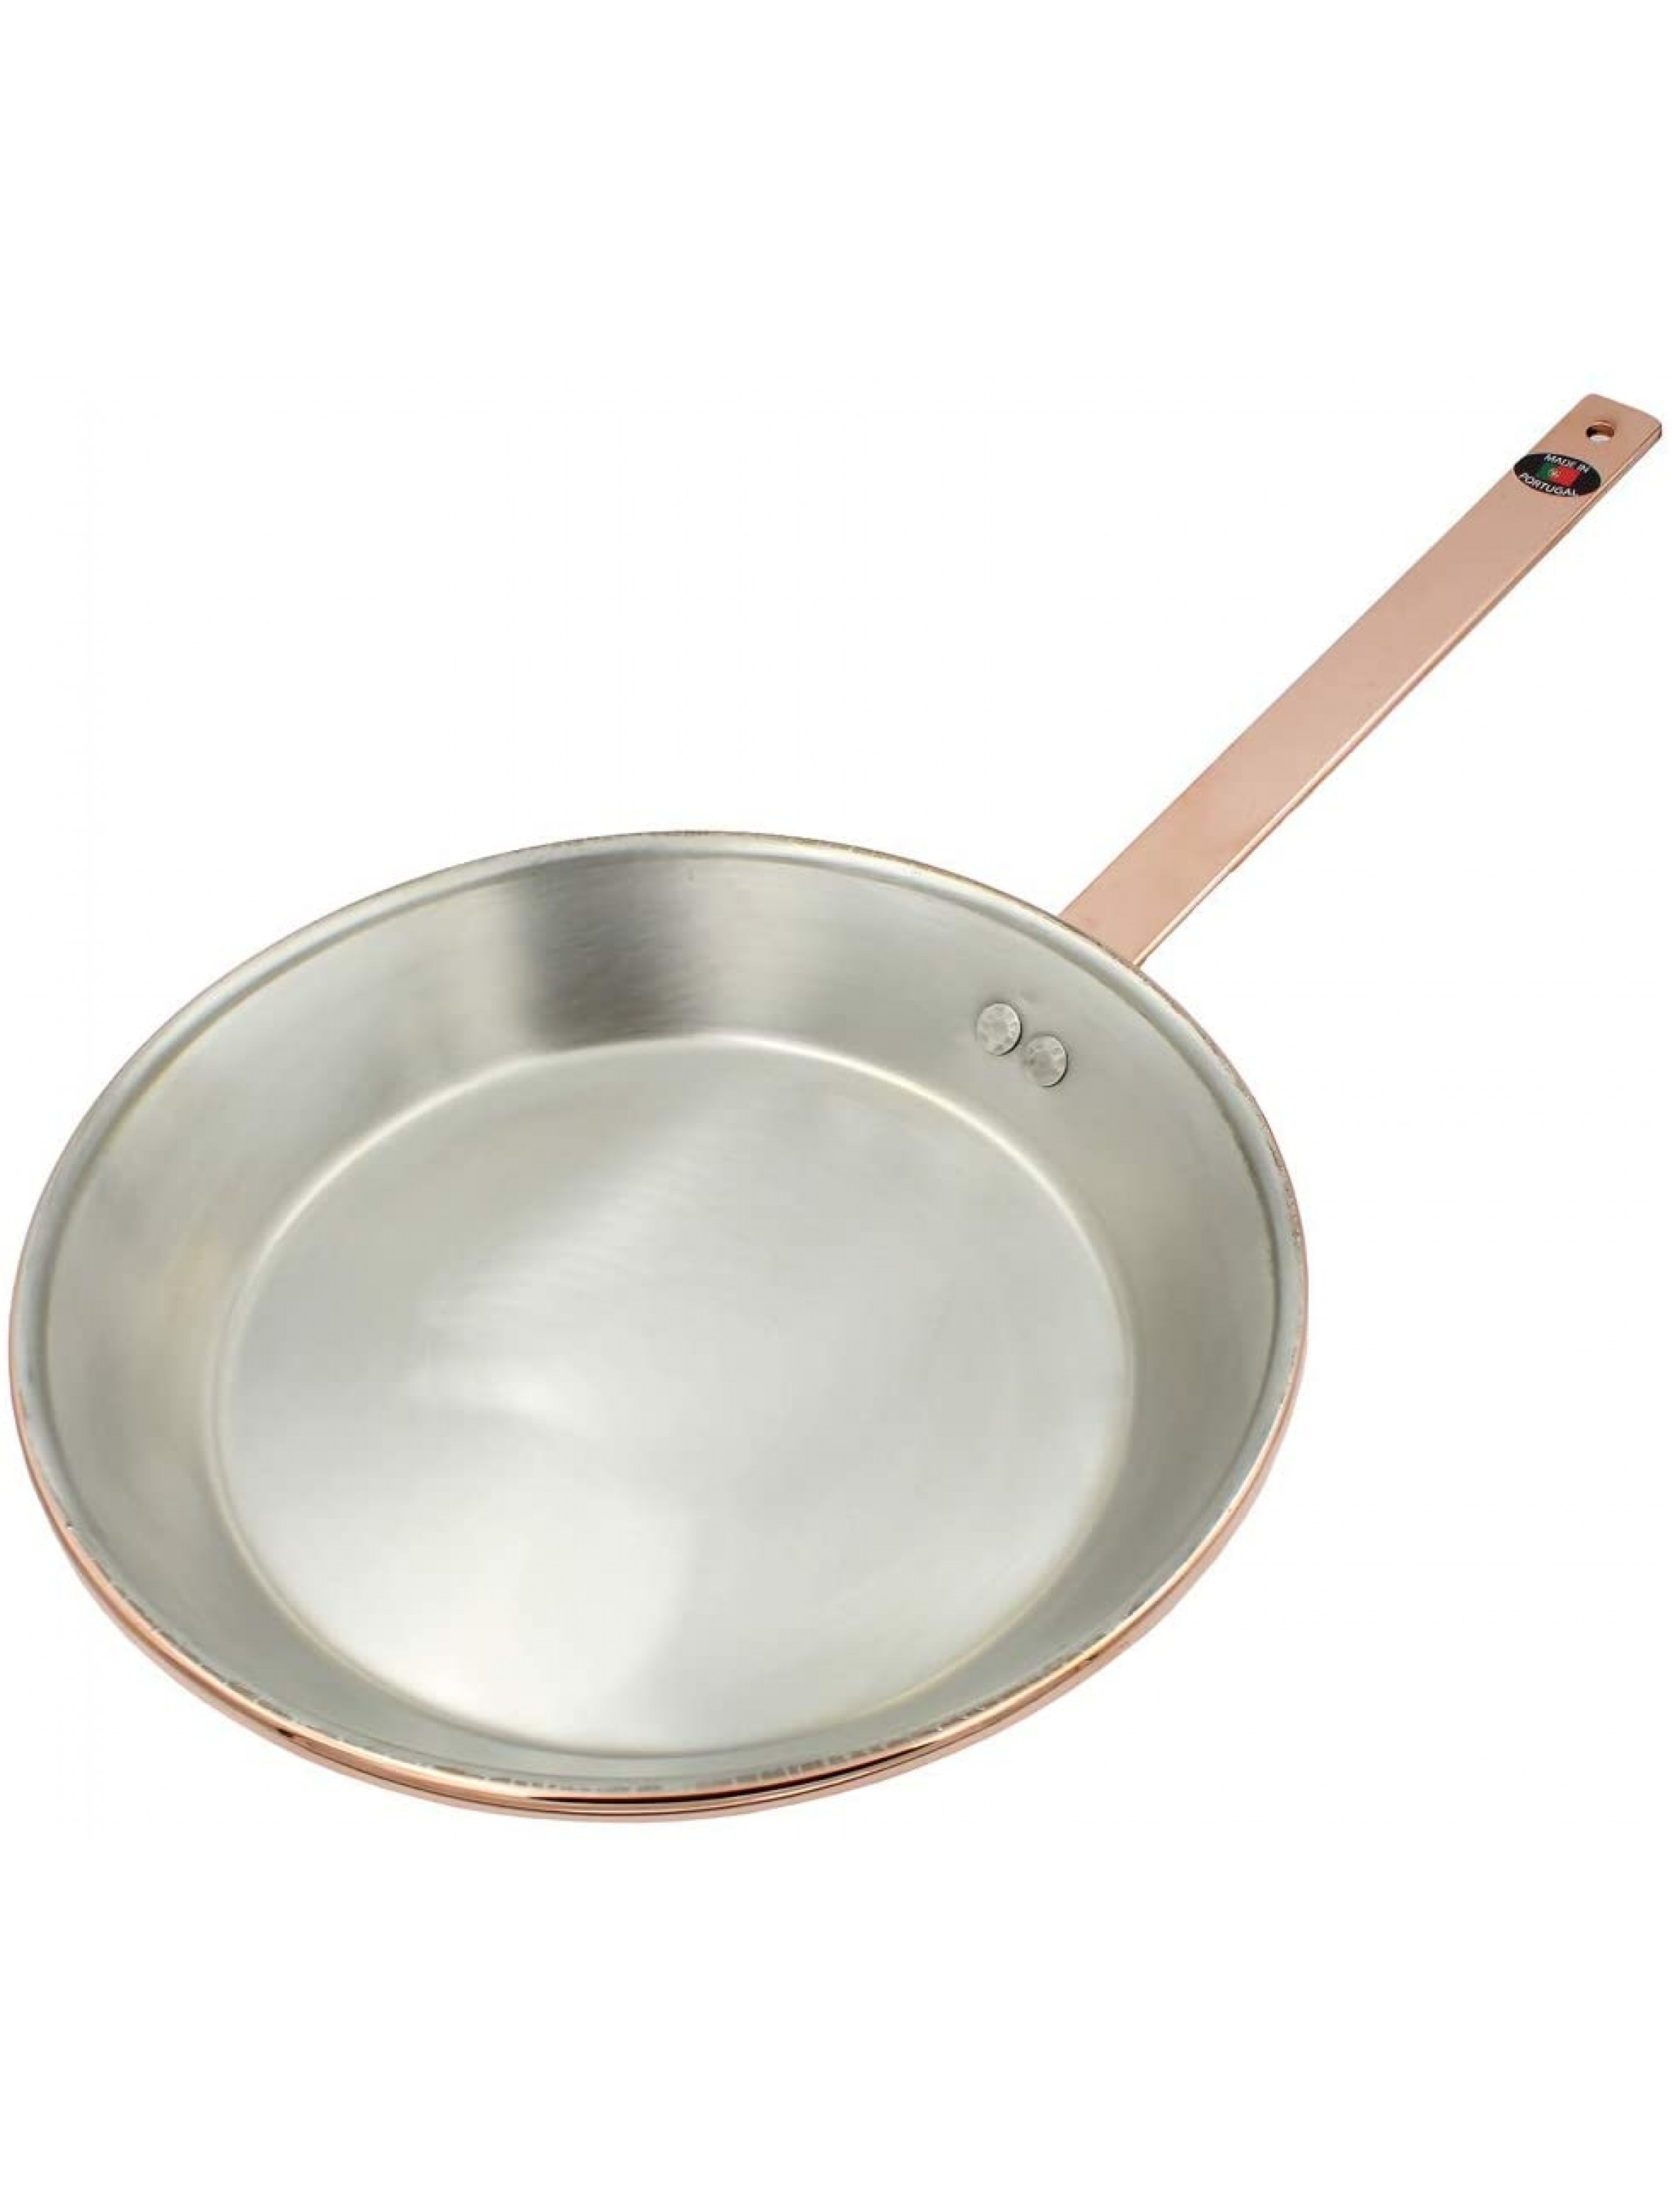 Traditional Copper Frying Pan Paella Pan Paellera With Handle Made In Portugal 12.5 Diameter - BS3IOHJ22